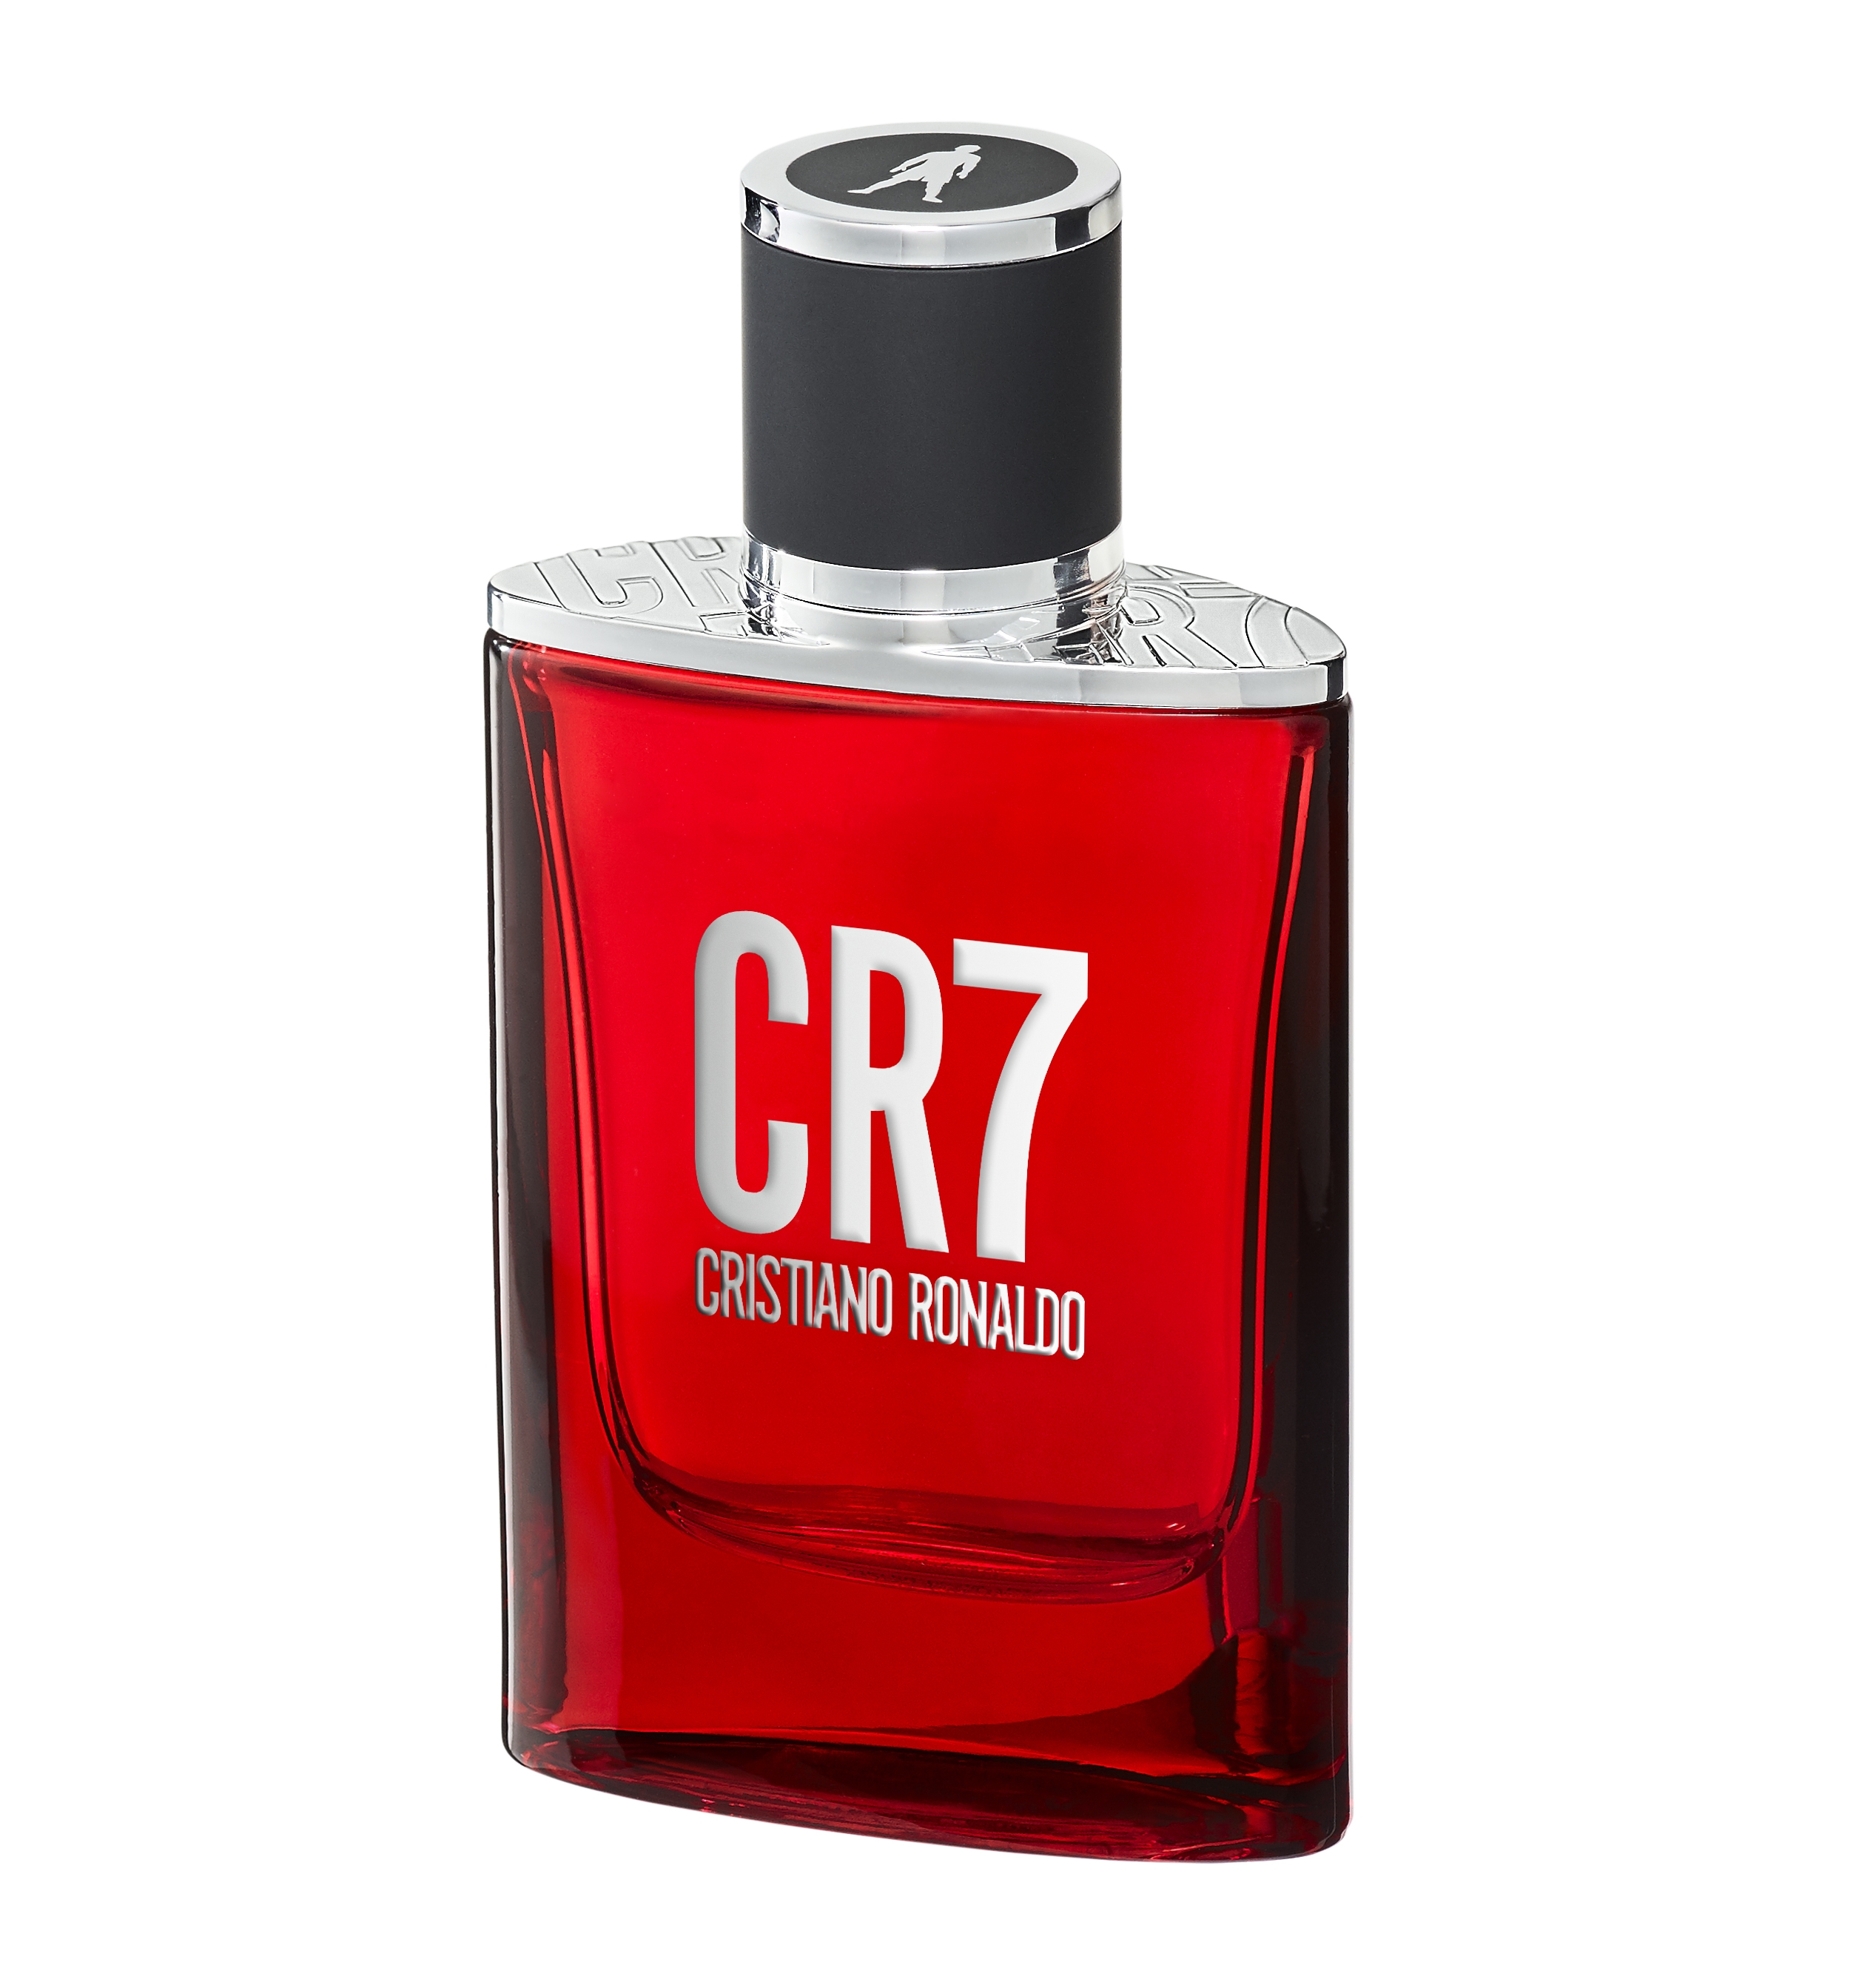 CR7 - Cristiano Ronaldo - The Brand New Fragrance - Red Passion - Exclusive  Collection - Luxury Fragrance - 30 ml - Avvenice